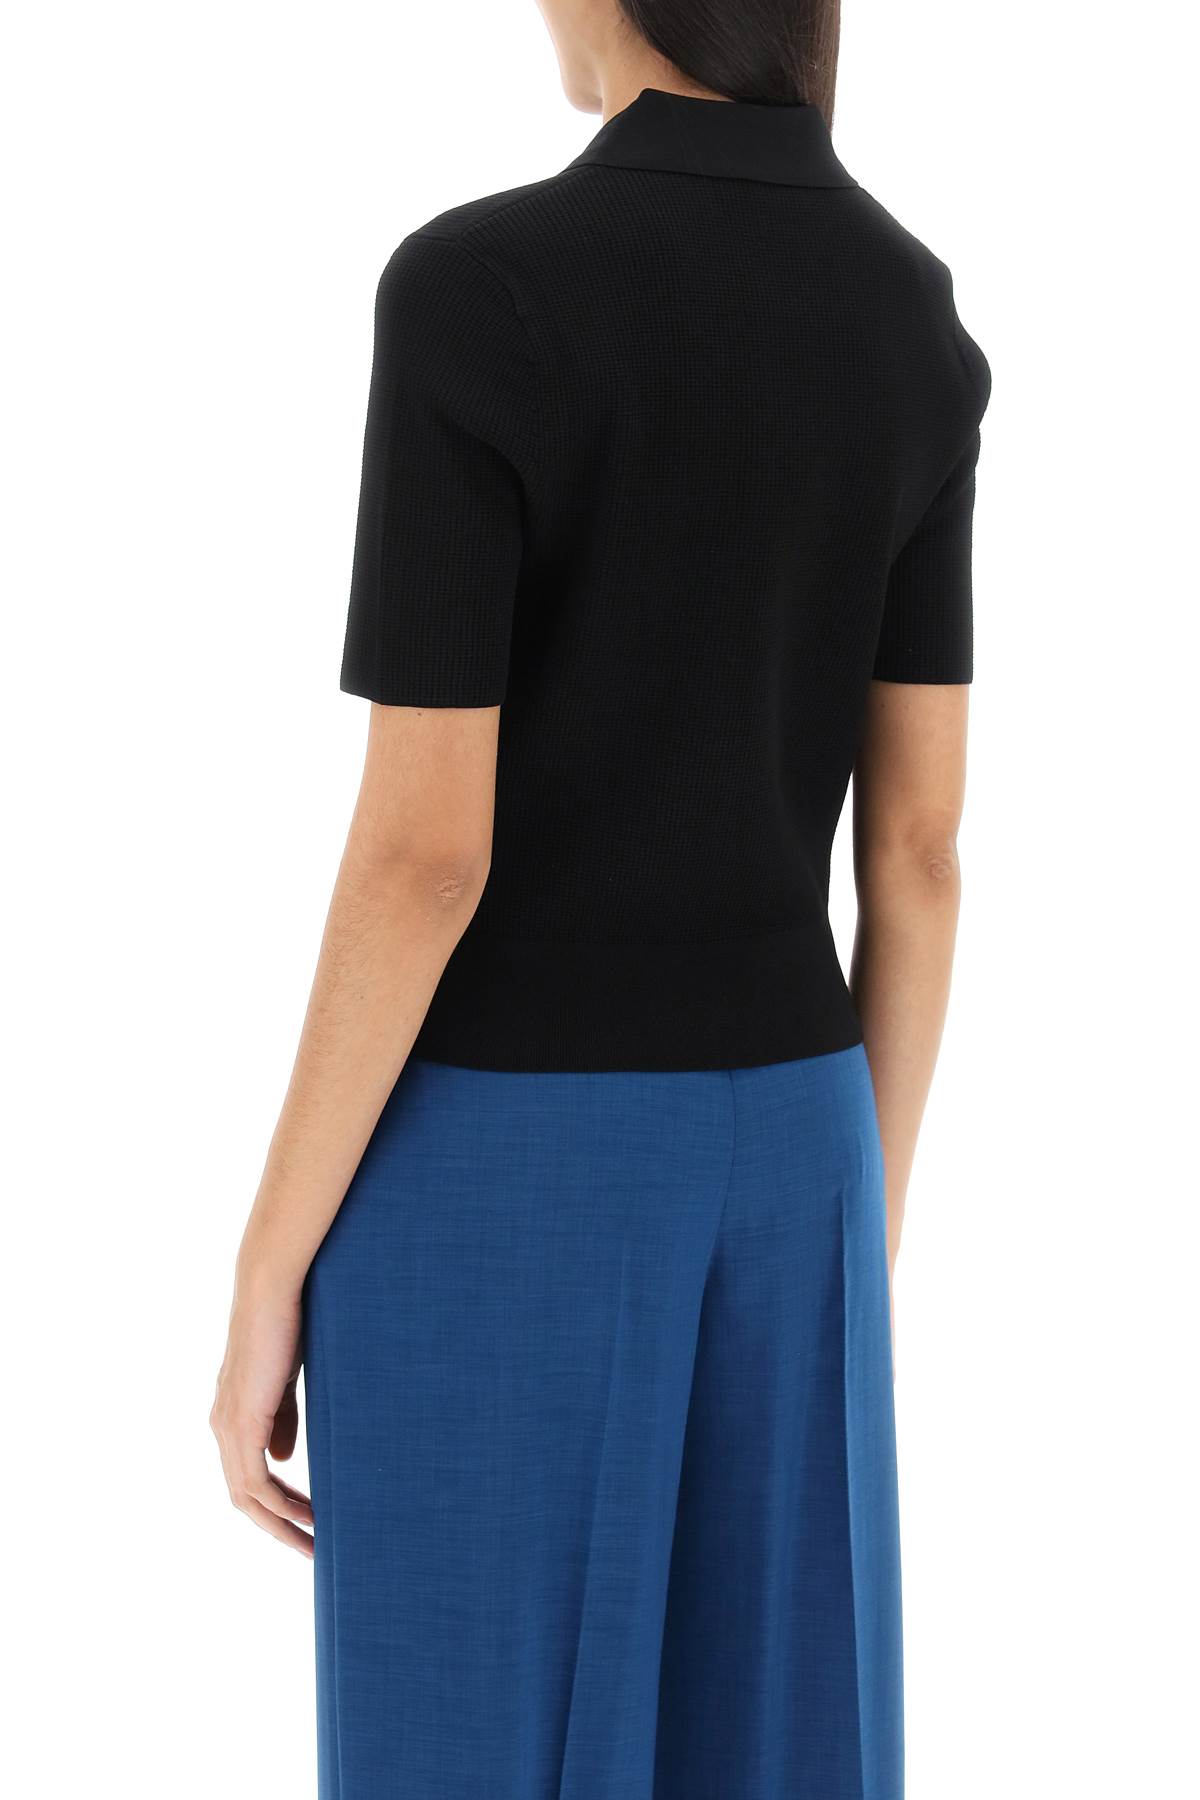 Shop Tory Burch Knitted Polo Shirt In Black (black)